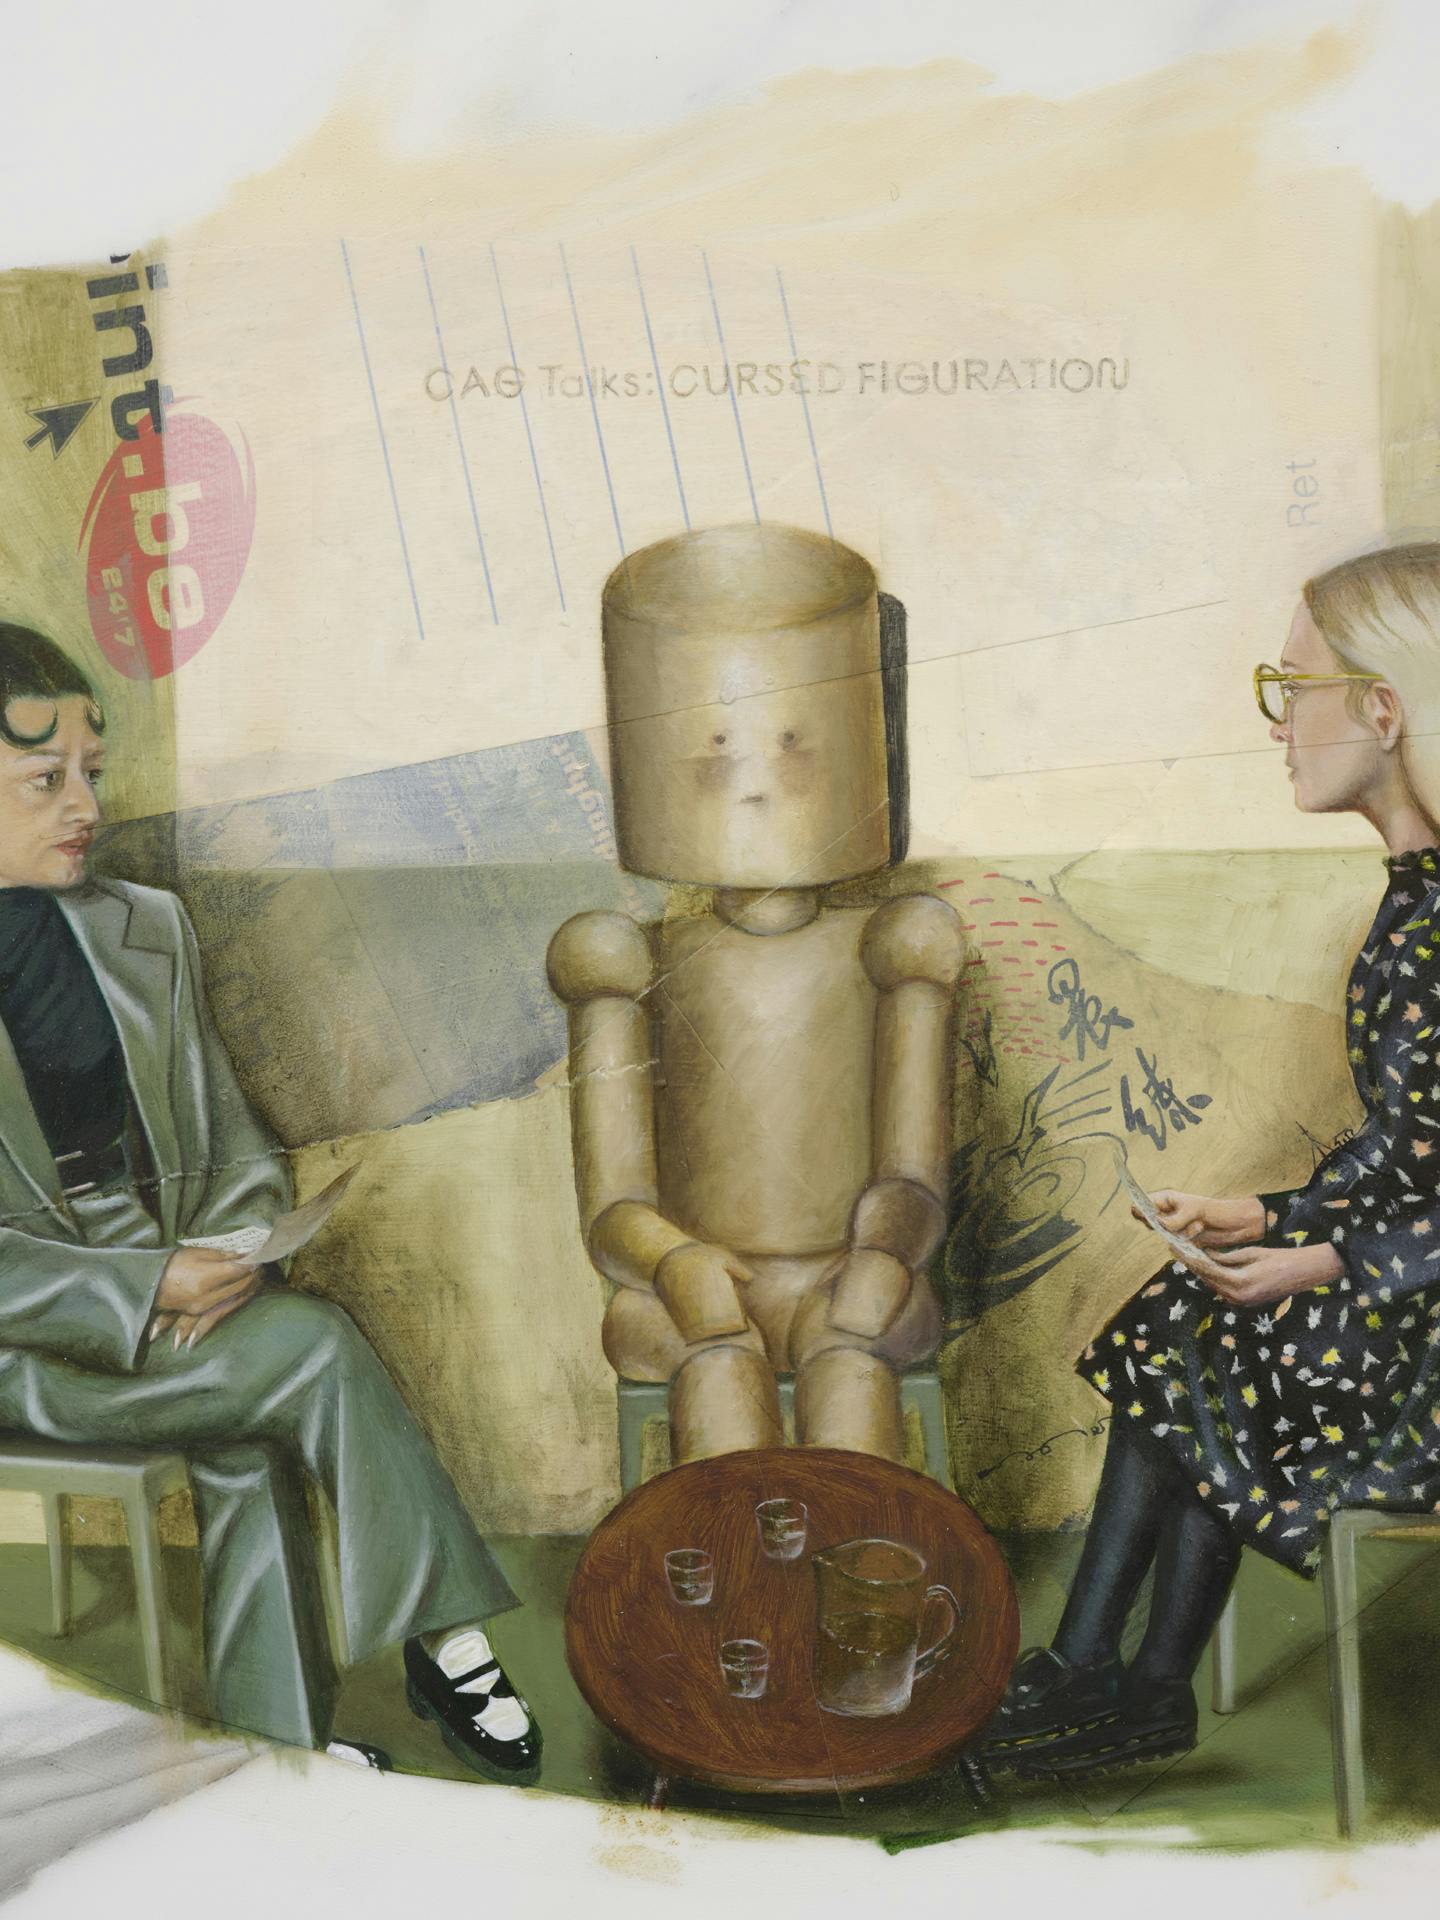 A close up view of a painting depicting three seated figures, the central one is a life-size wooden doll, surrounded by two humans with crossed legs holding paper notes.